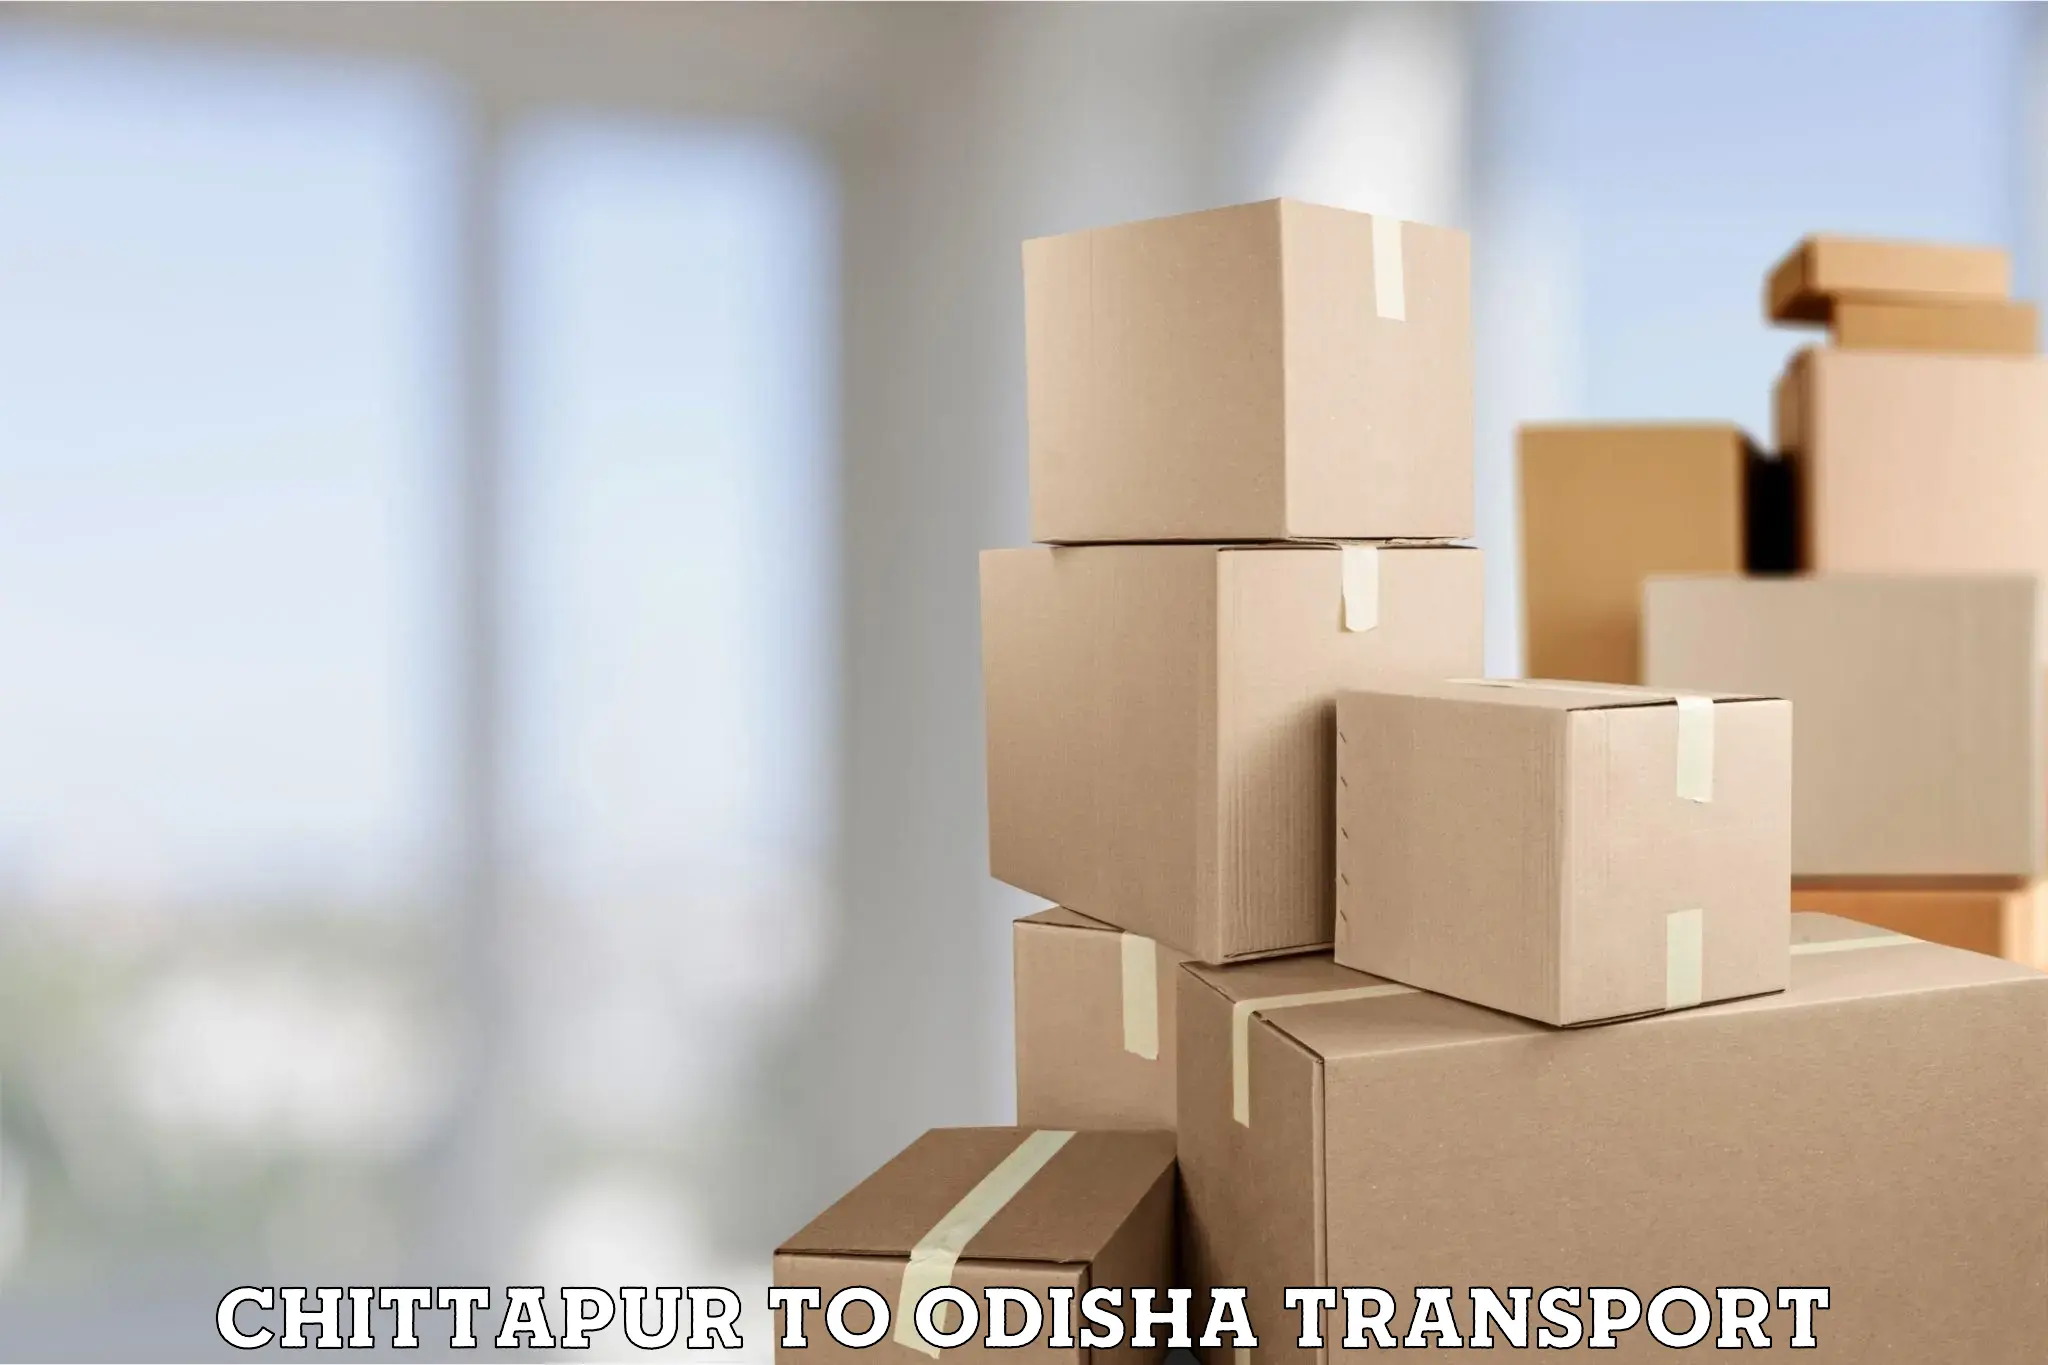 Two wheeler parcel service in Chittapur to Kendrapara